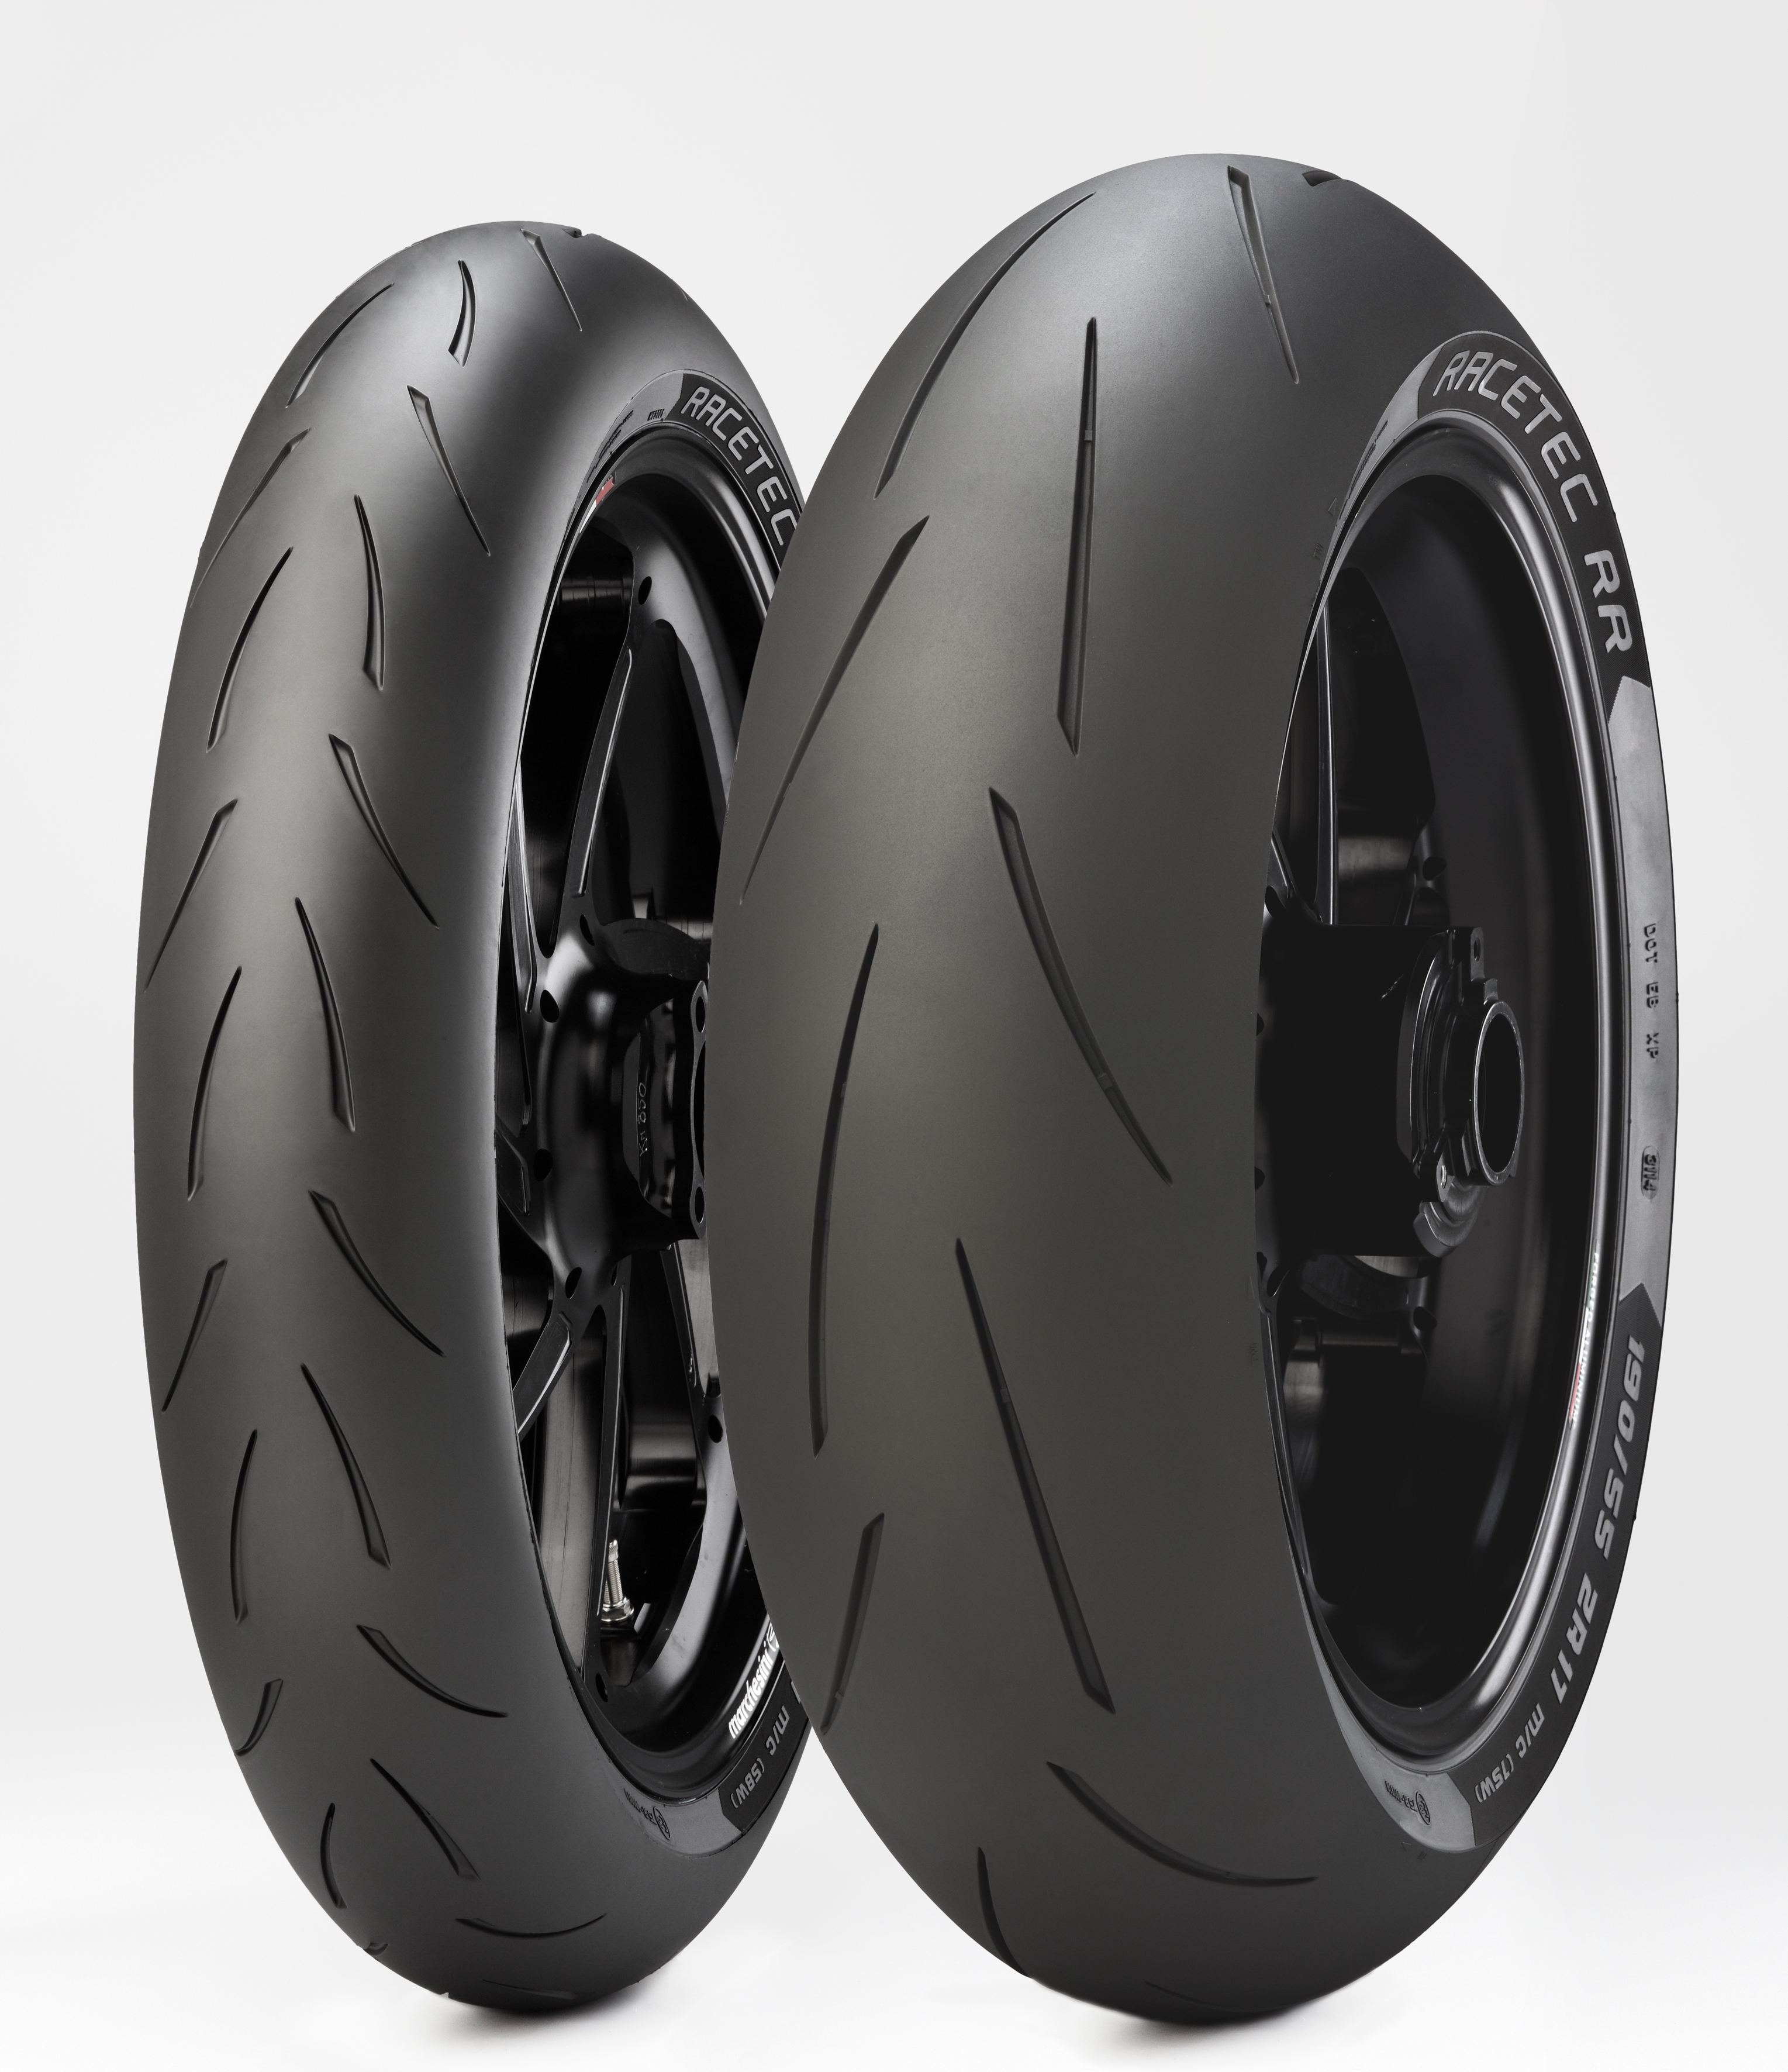 Motorcycle News makes Metzeler Racetec RR its 2015 Tyre of the Year